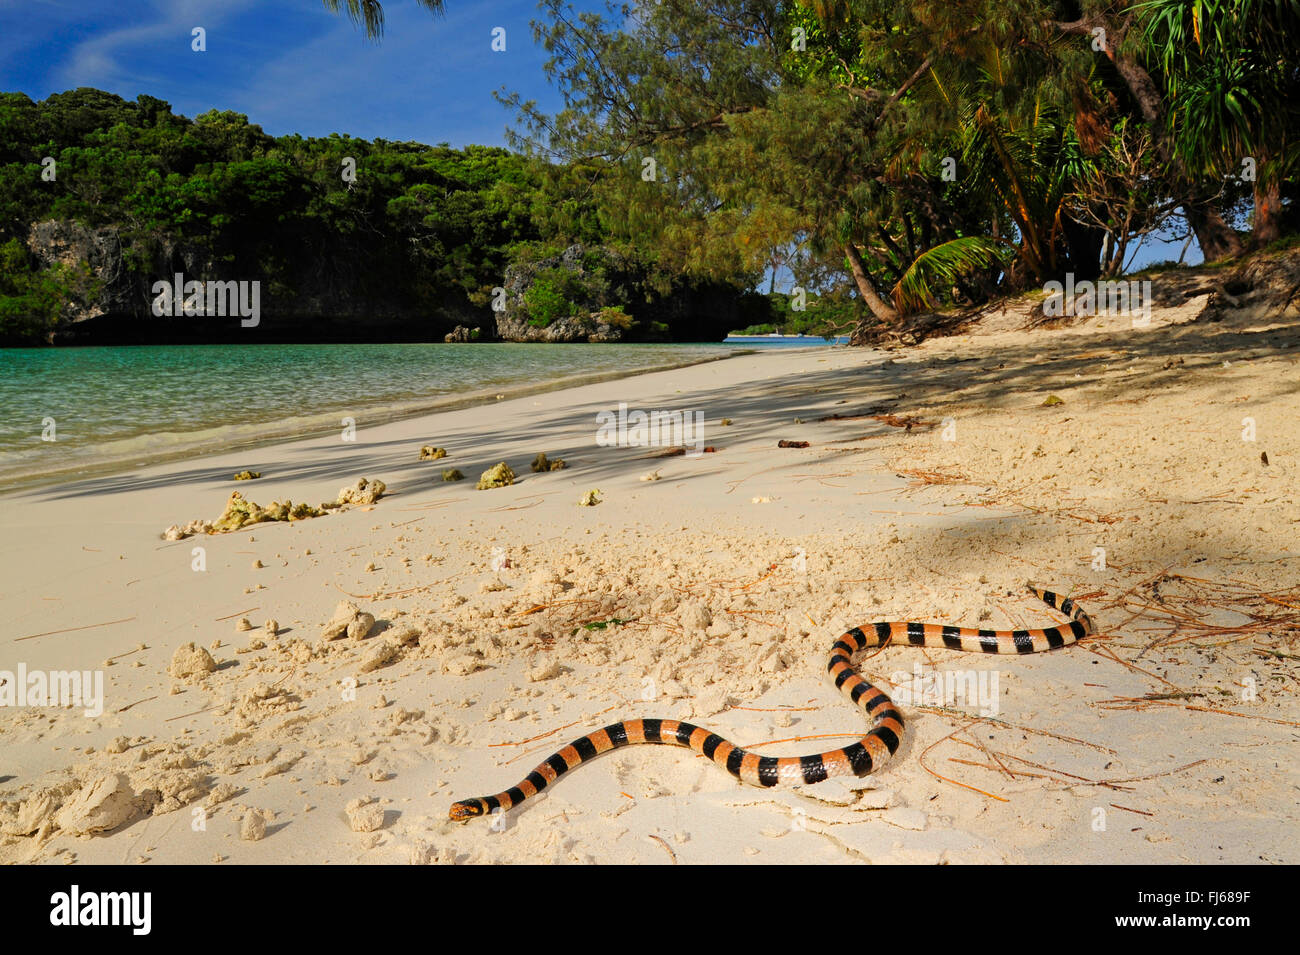 Banded yellow-lipped sea krait, Banded yellow-lipped sea snake, Banded sea snake (Laticauda colubrina), sea snake on the beach of ╬le des Pins, New Caledonia, Ile des Pins Stock Photo